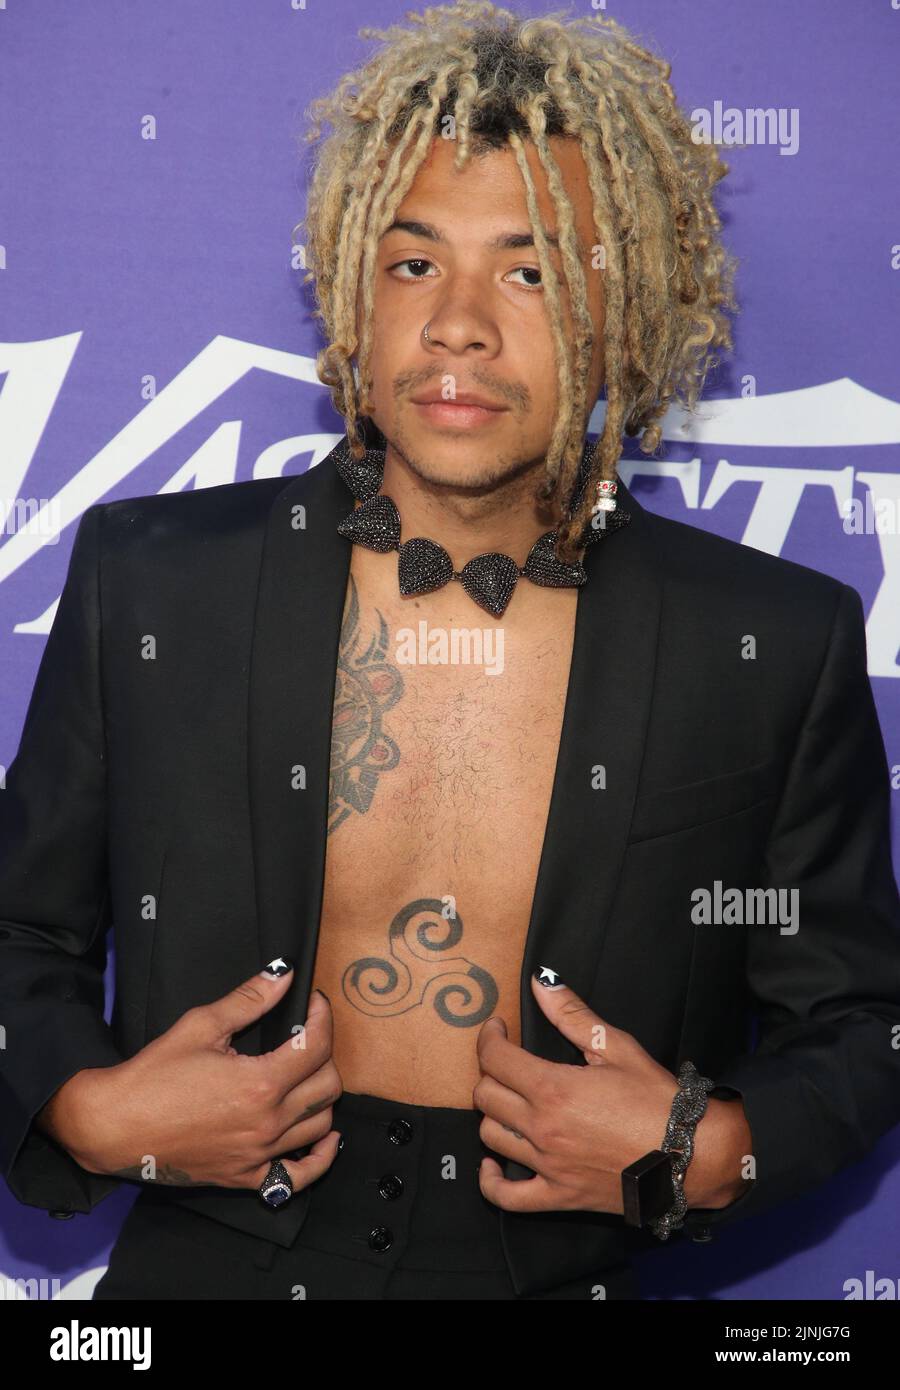 Los Angeles, California, USA. 11th Aug, 2022. Iann Dior. Variety's 2022 Power Of Young Hollywood Celebration Presented By Facebook Gaming held at Neuehouse Hollywood in Los Angeles. Credit: AdMedia Photo via/Newscom/Alamy Live News Stock Photo